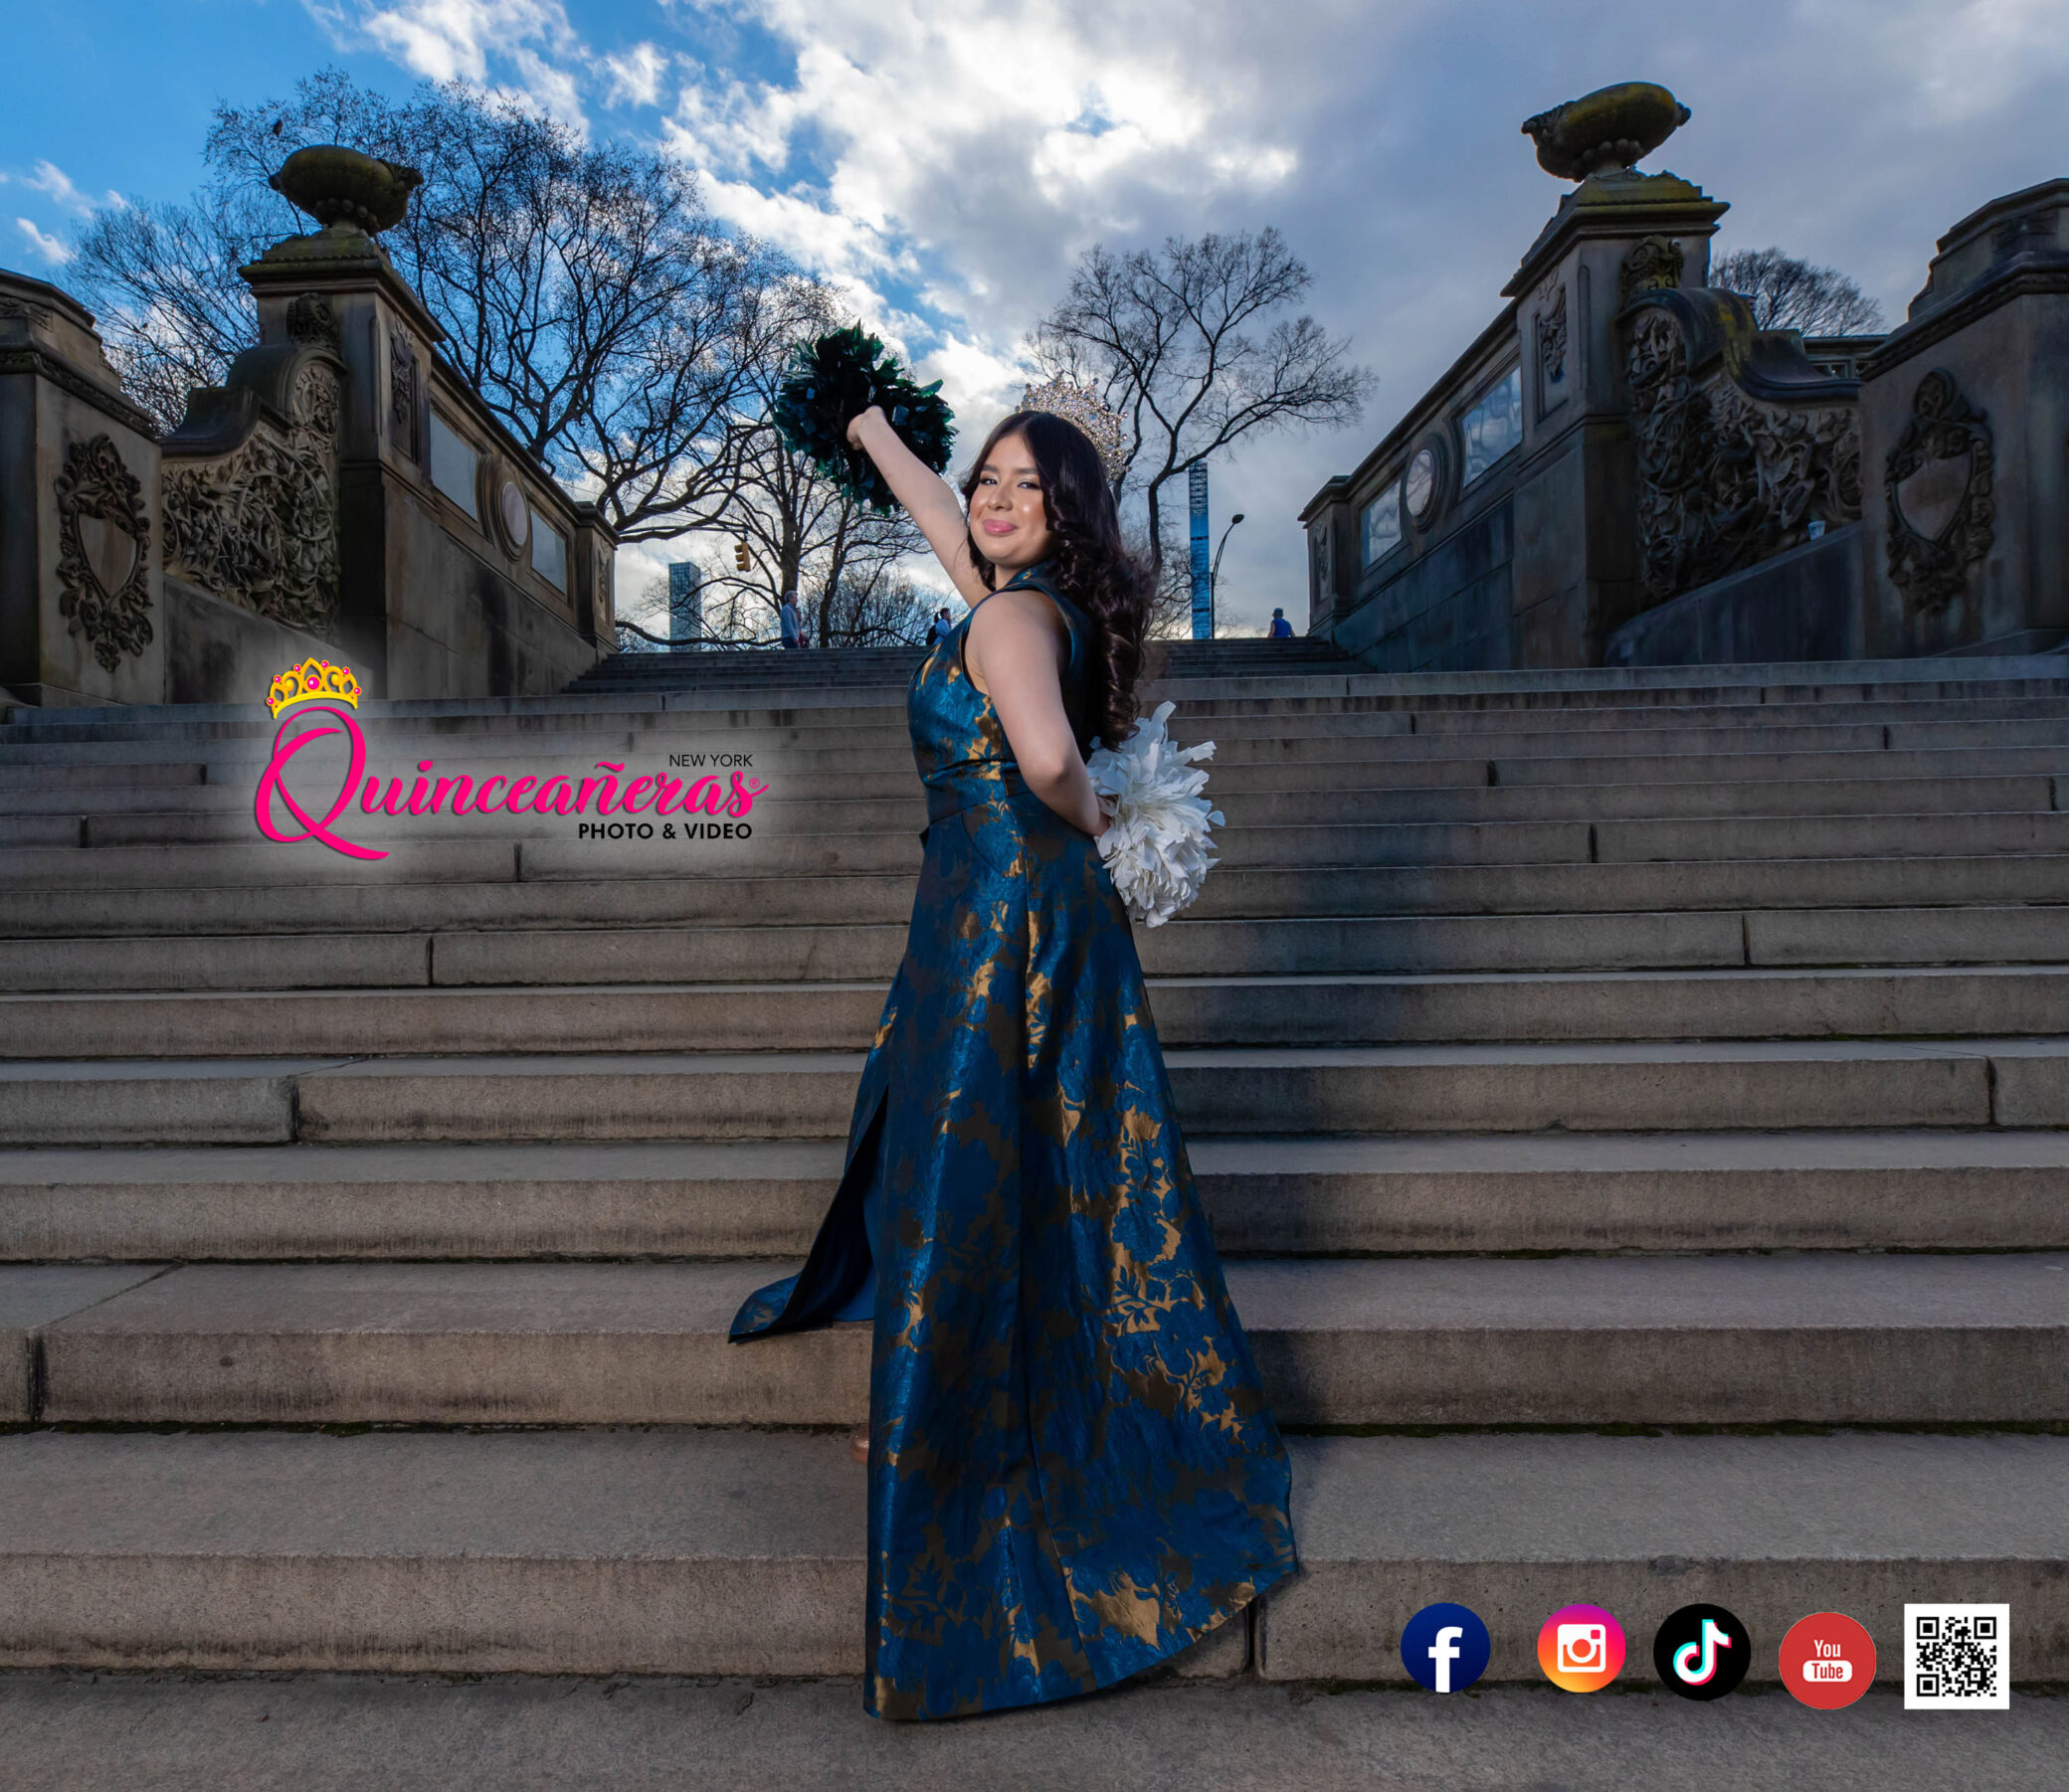 Photography & Video for Quinceaneras & Sweet 16's in NYC